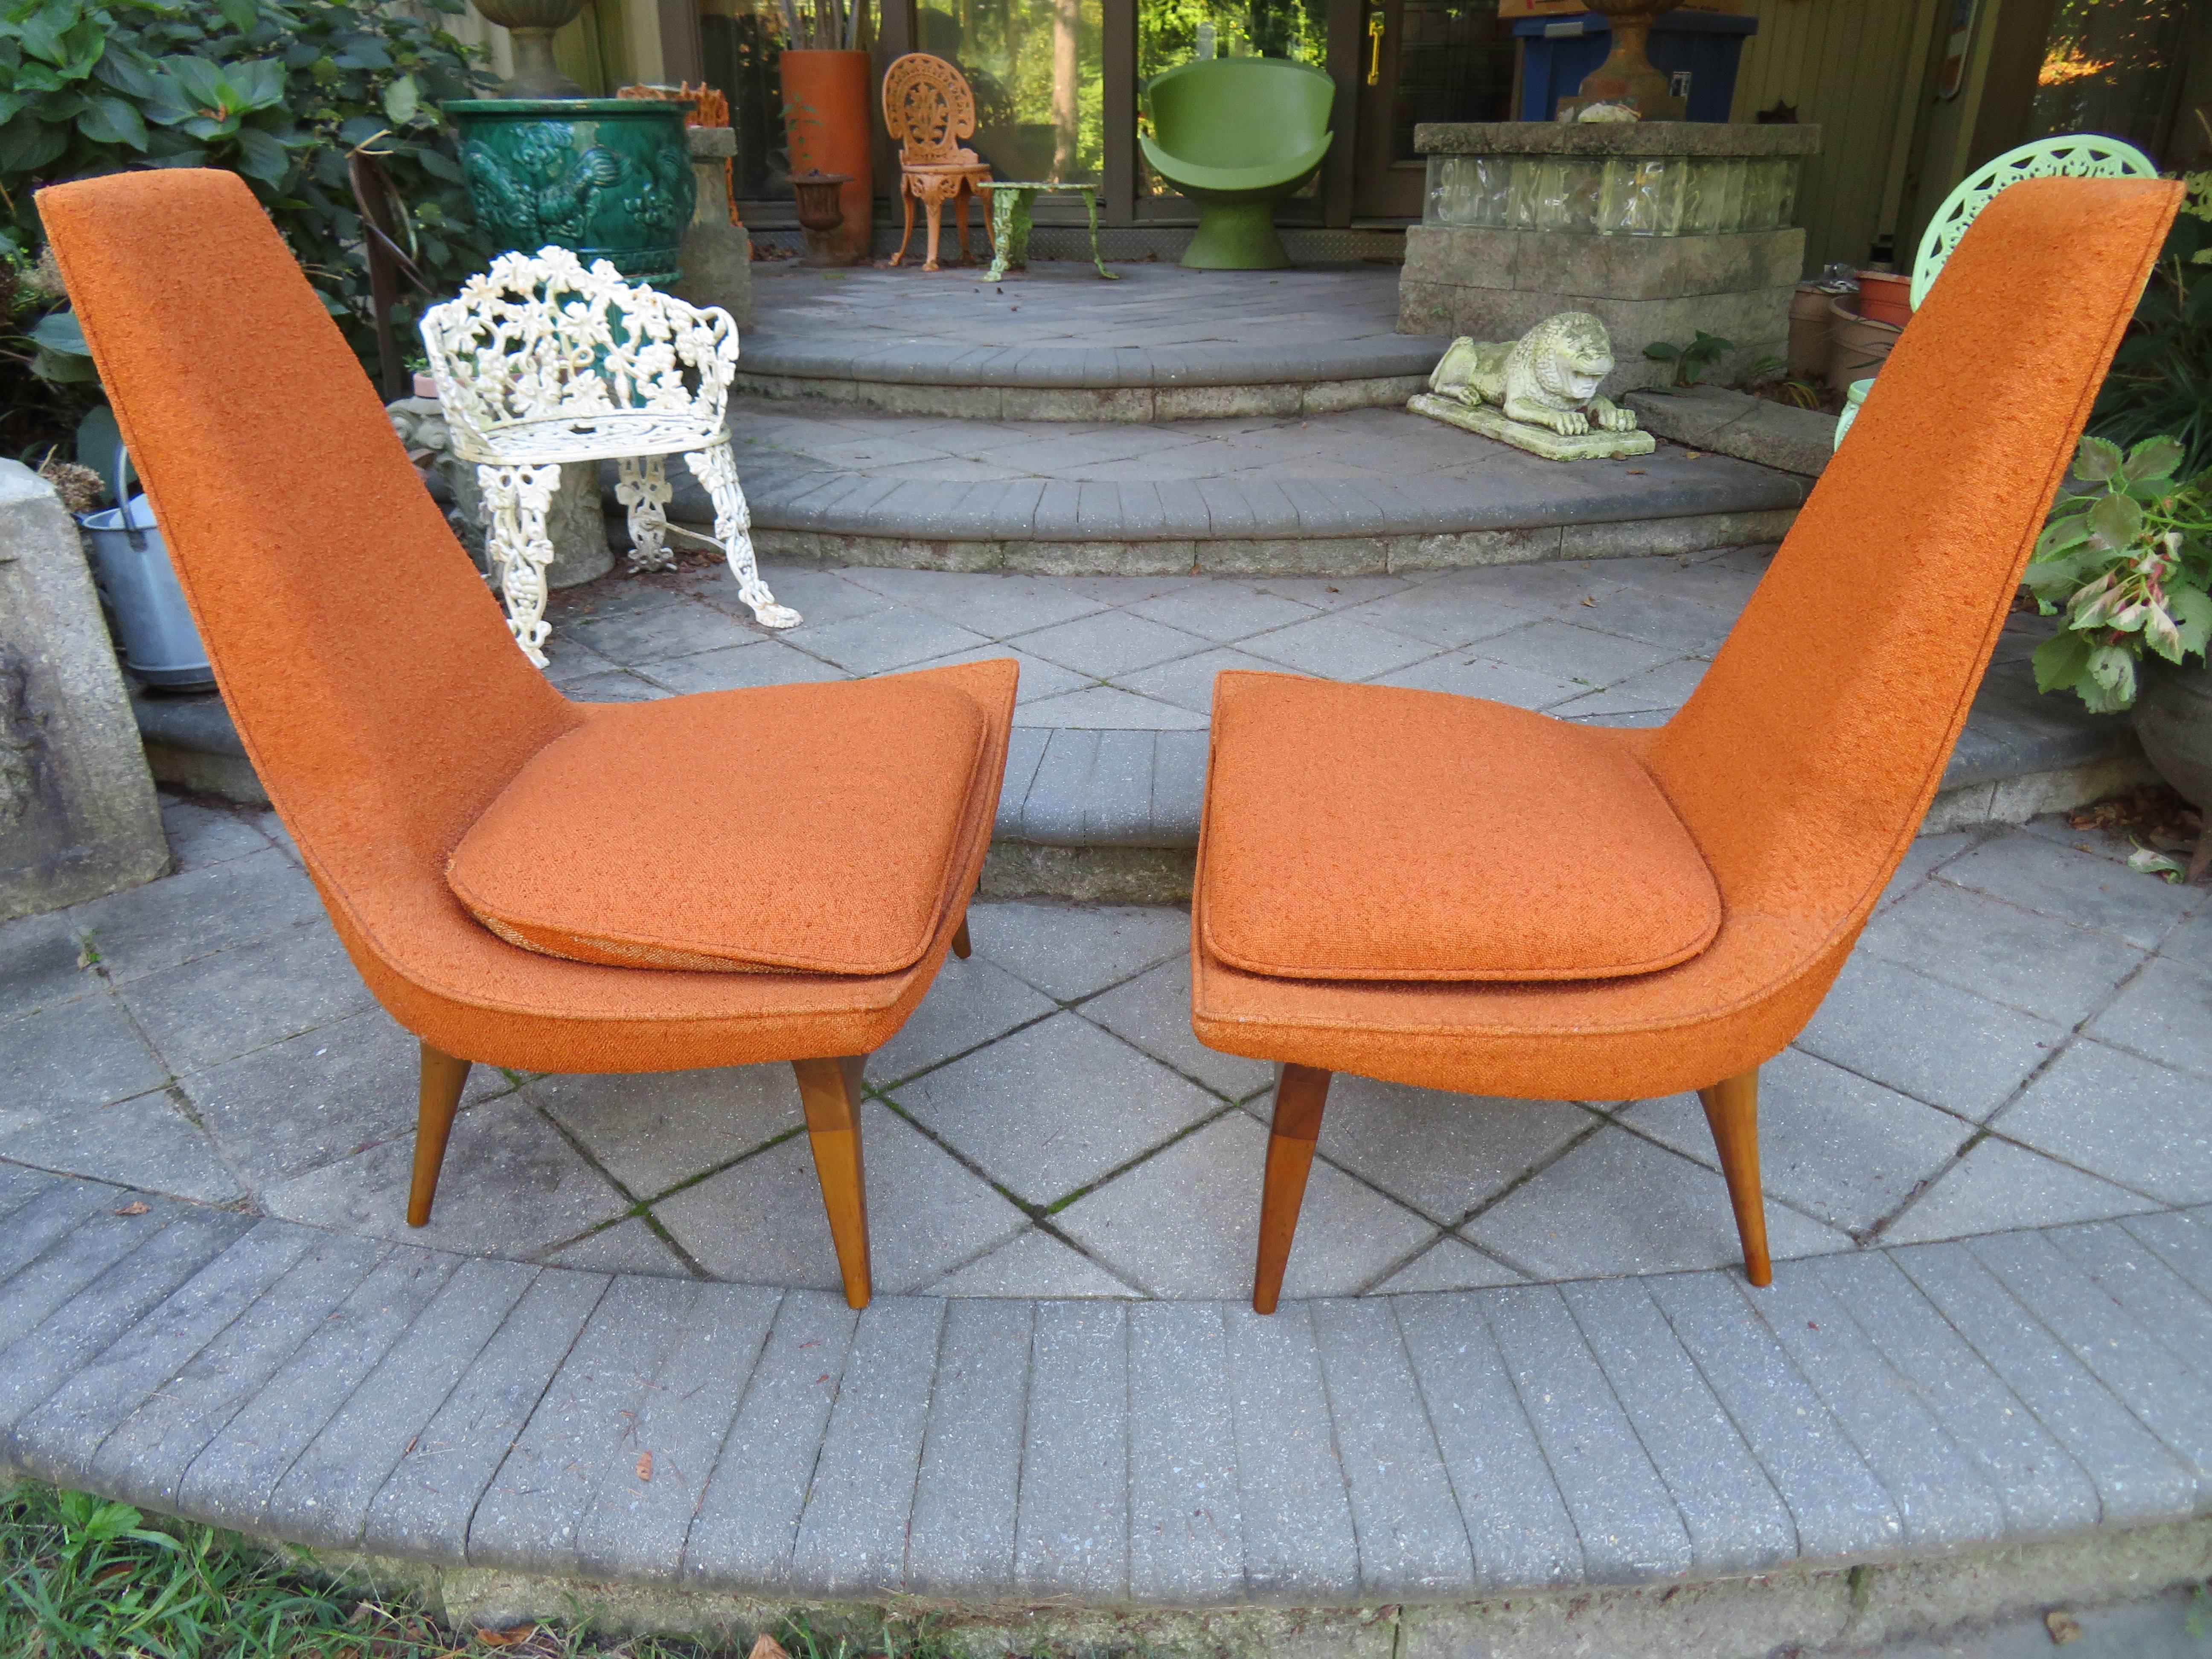 American Fantastic Pair of Sculptural Walnut Lounge Chairs by Karpen, Mid-Century Modern